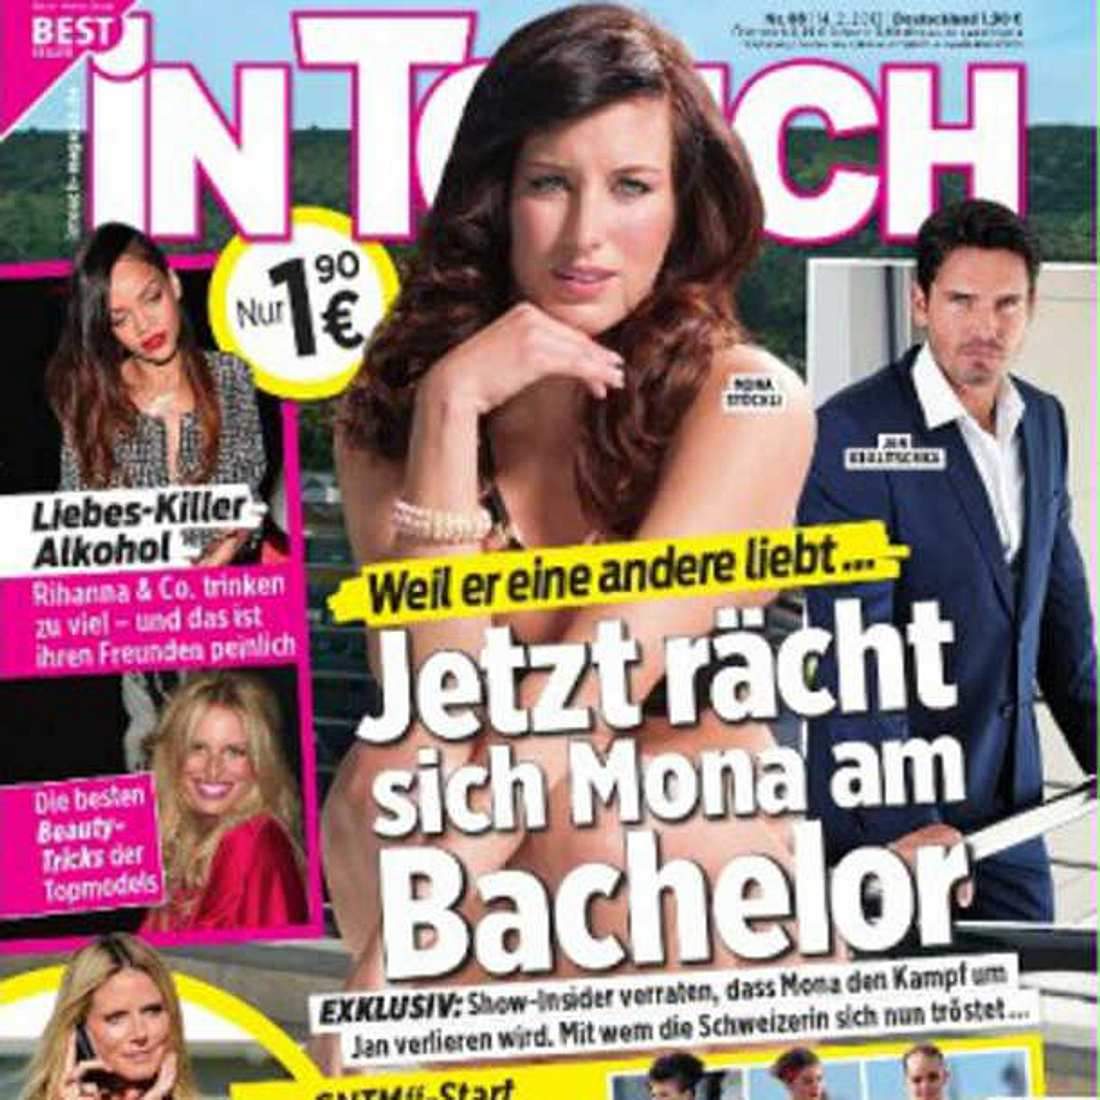 inTouch